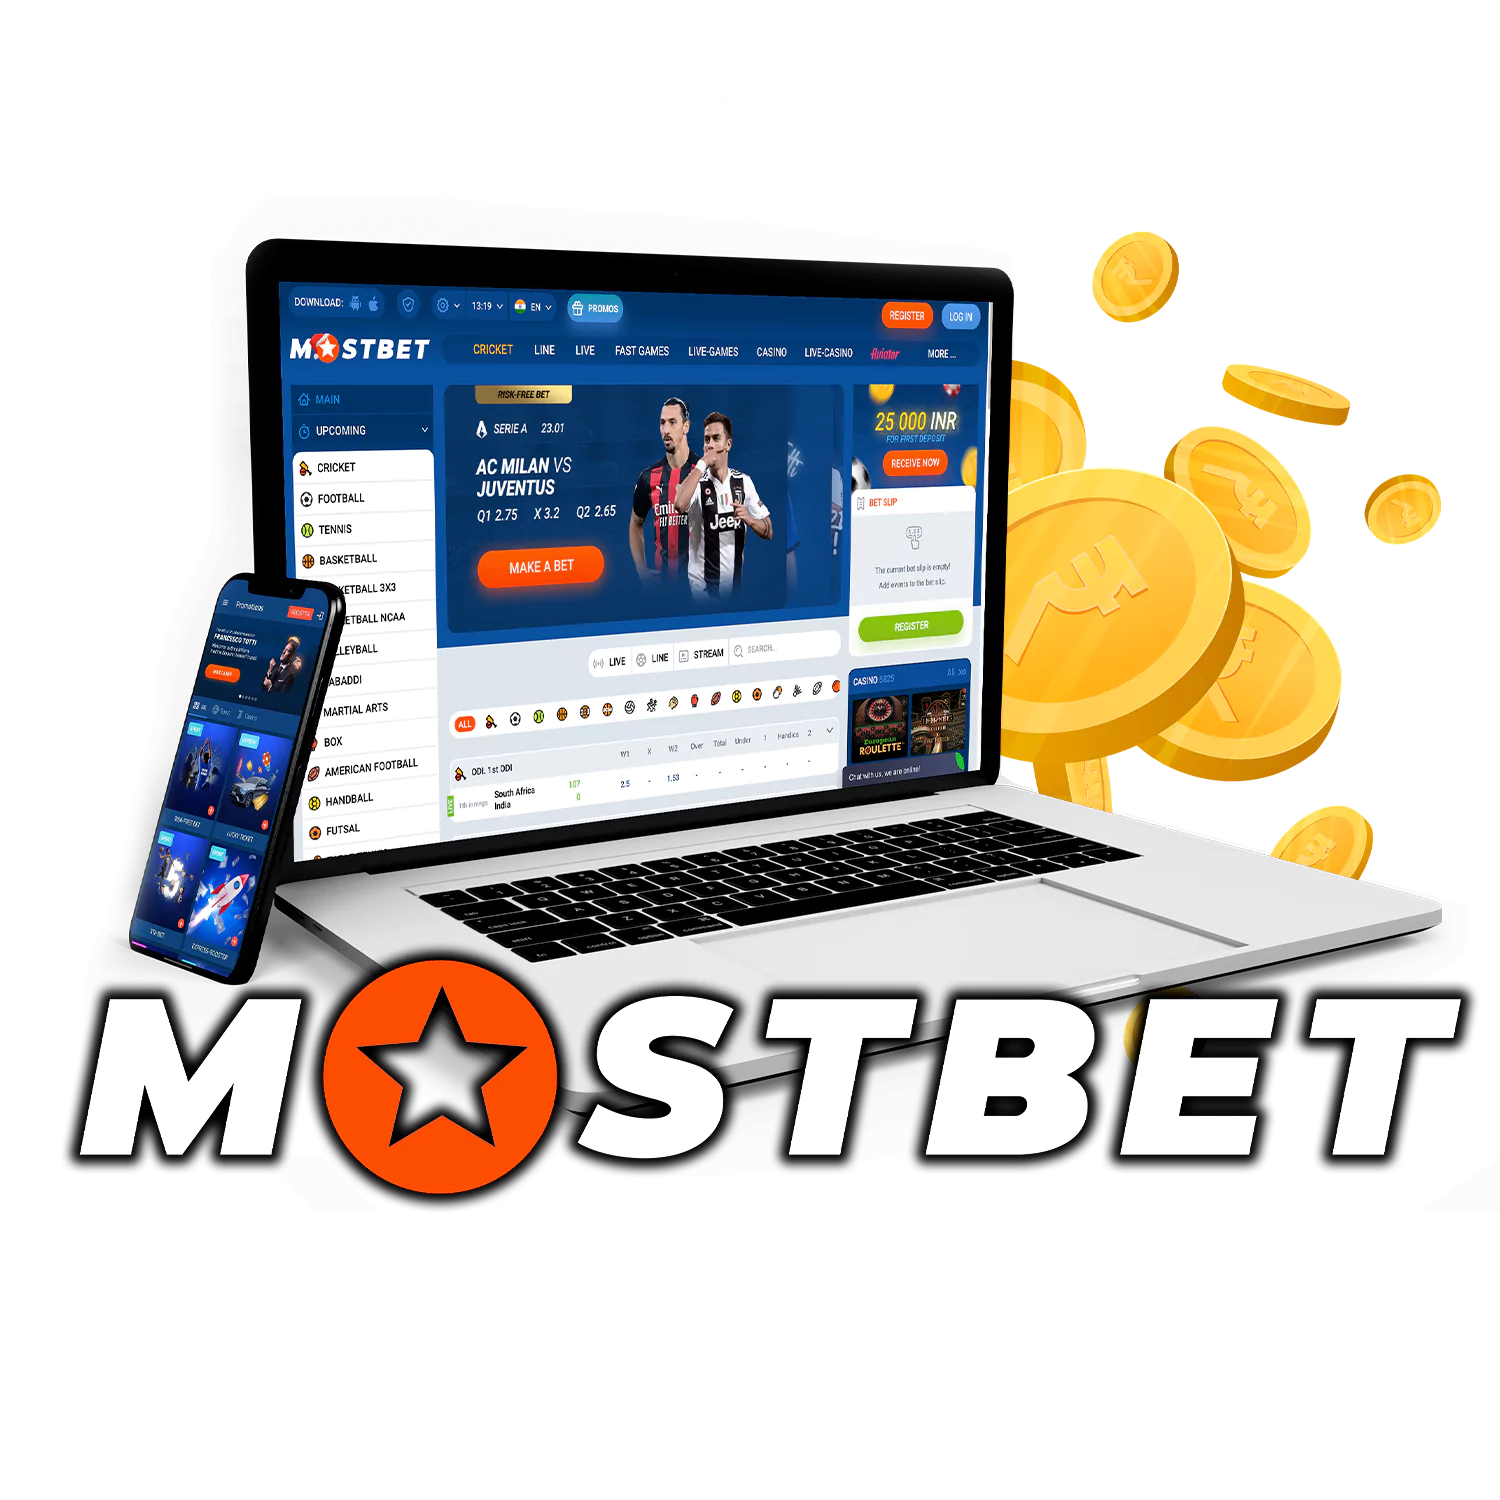 Essential Mostbet betting company and casino in India Smartphone Apps